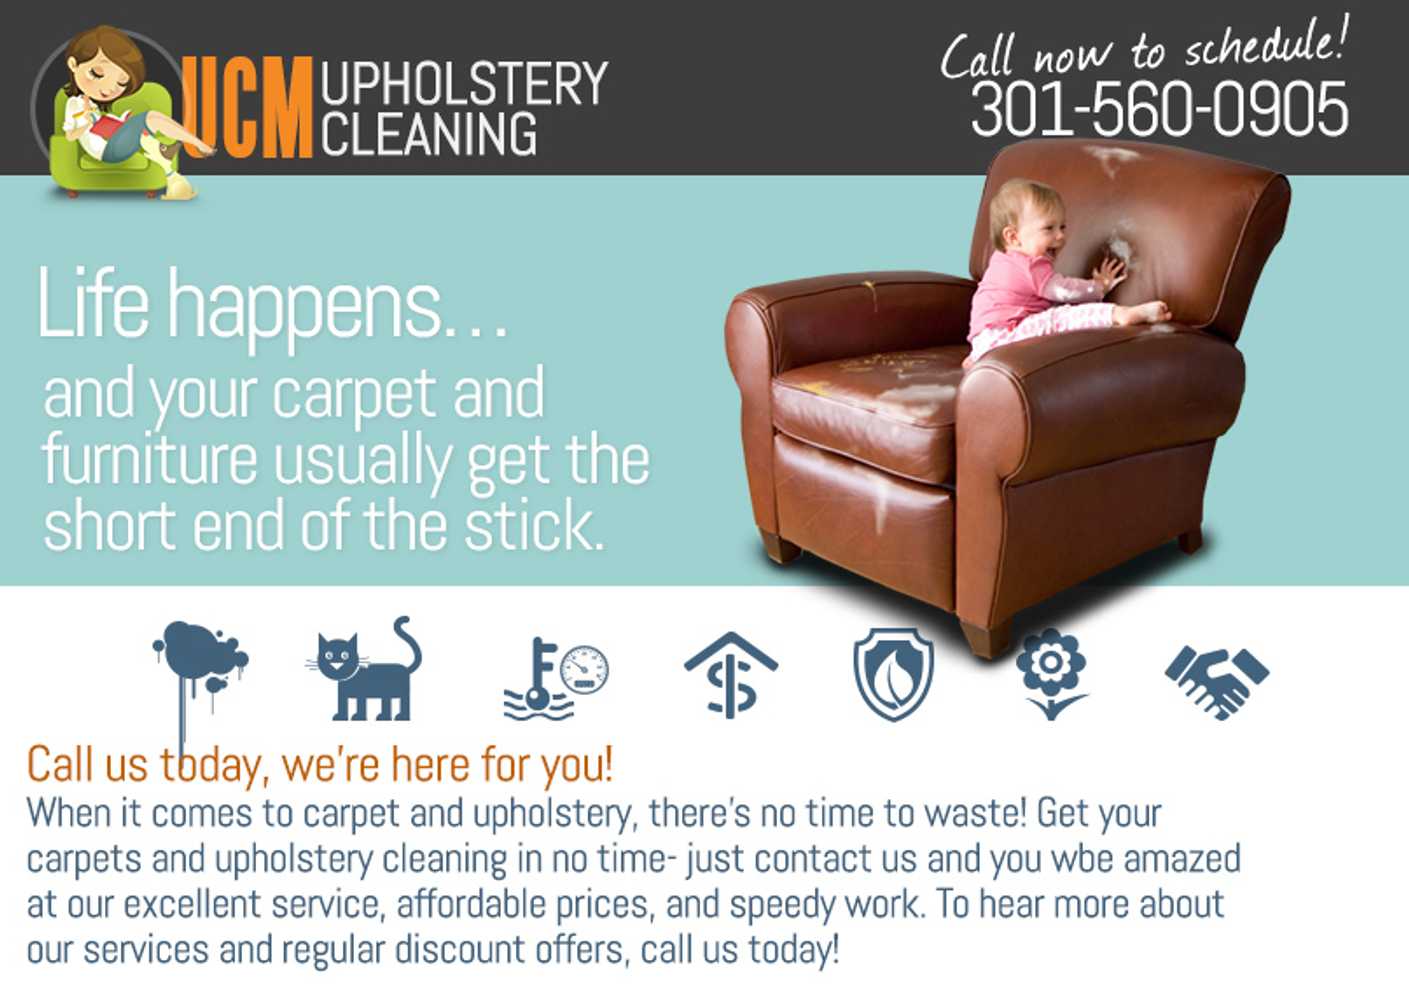 Upholstery Cleaning Services in DC